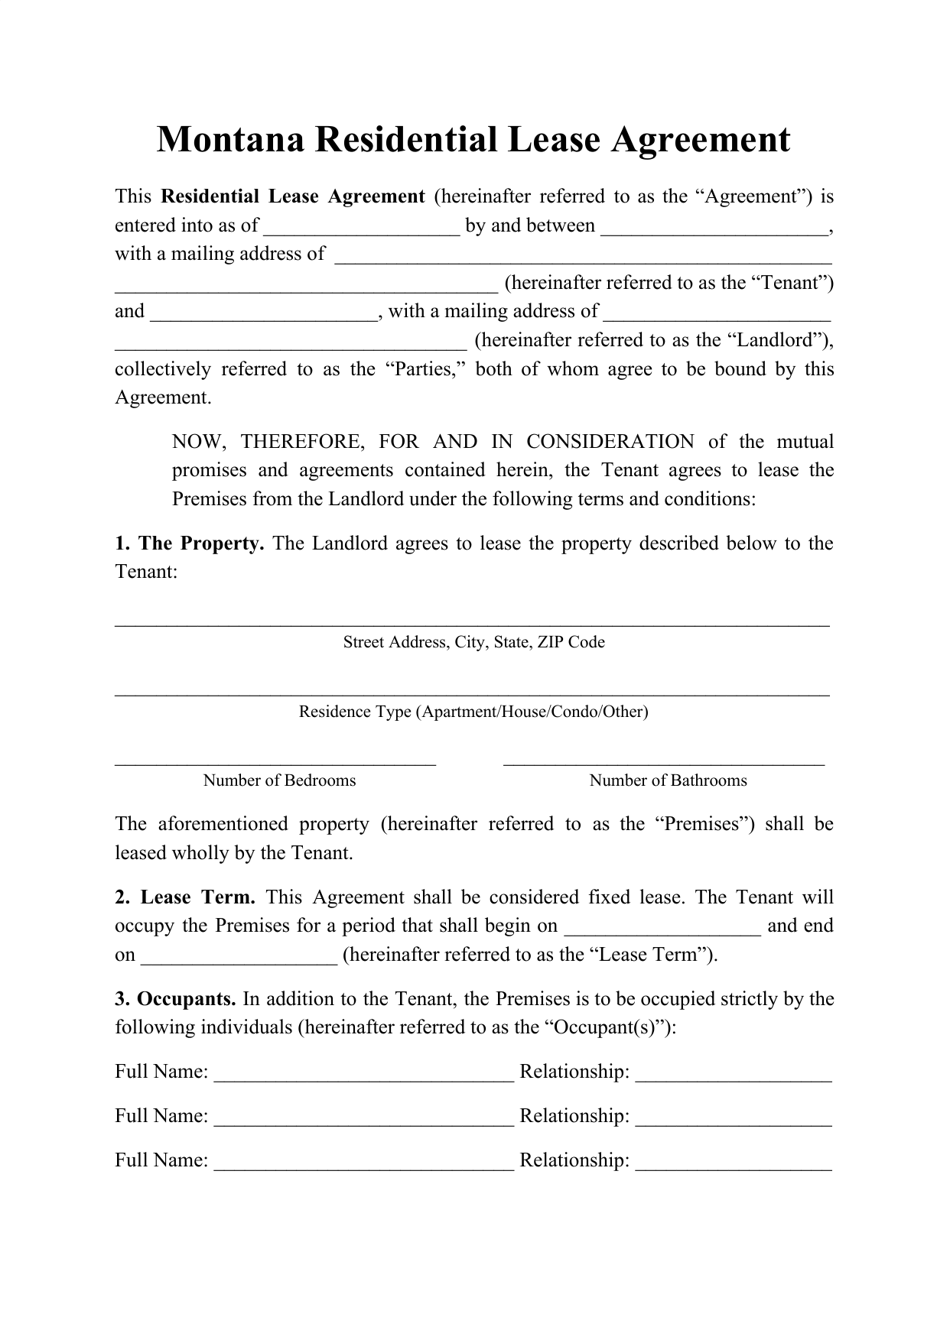 Residential Lease Agreement Template - Montana, Page 1